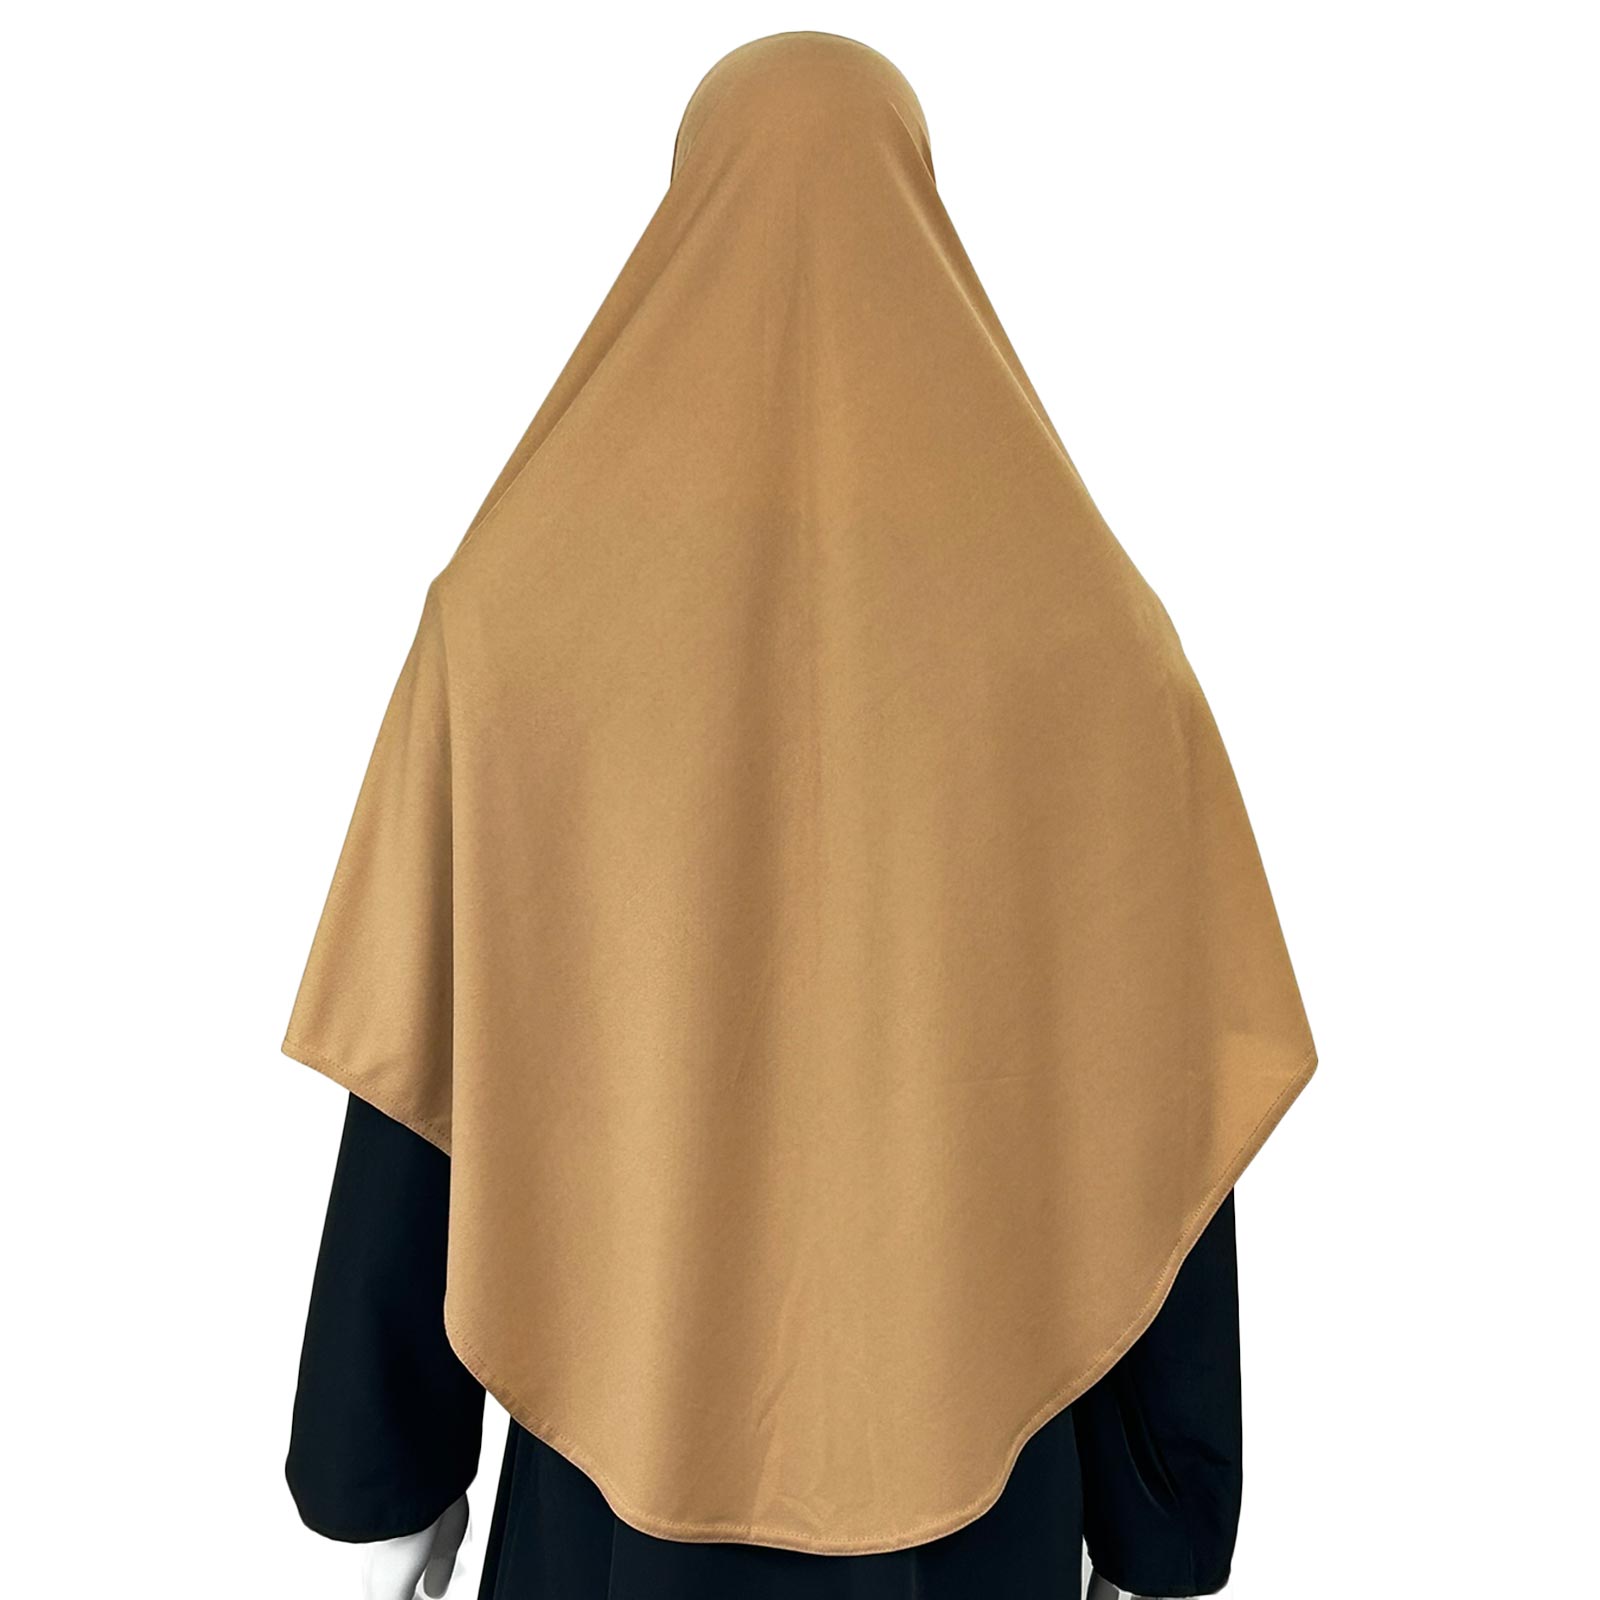 pull-on-instant-hijab-camel-full-coverage